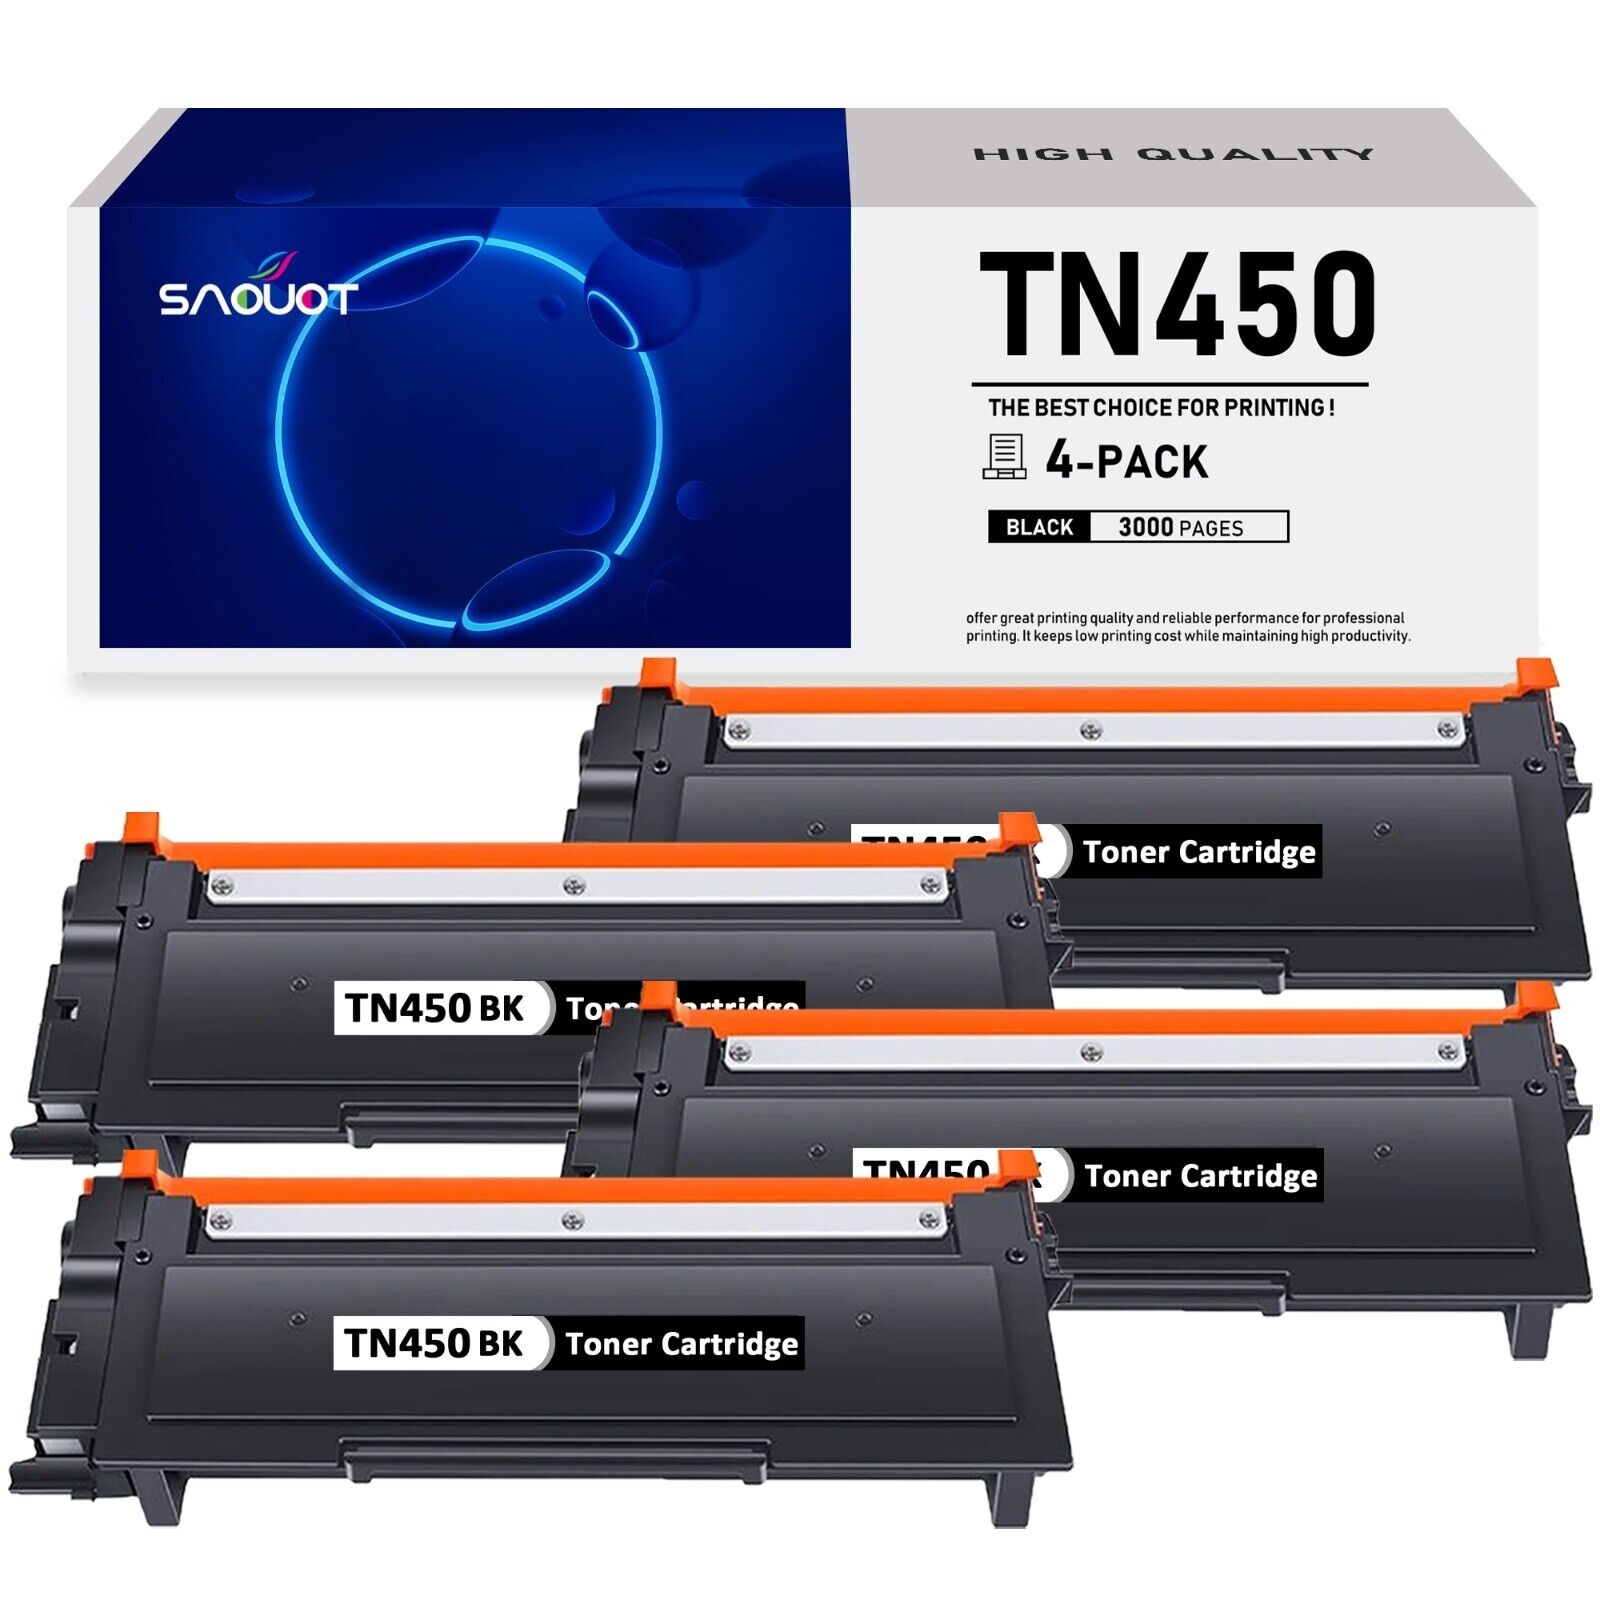 TN450 Toner Cartridge Replacement for Brother HL-2280DW HL-2230 HL-2270DW